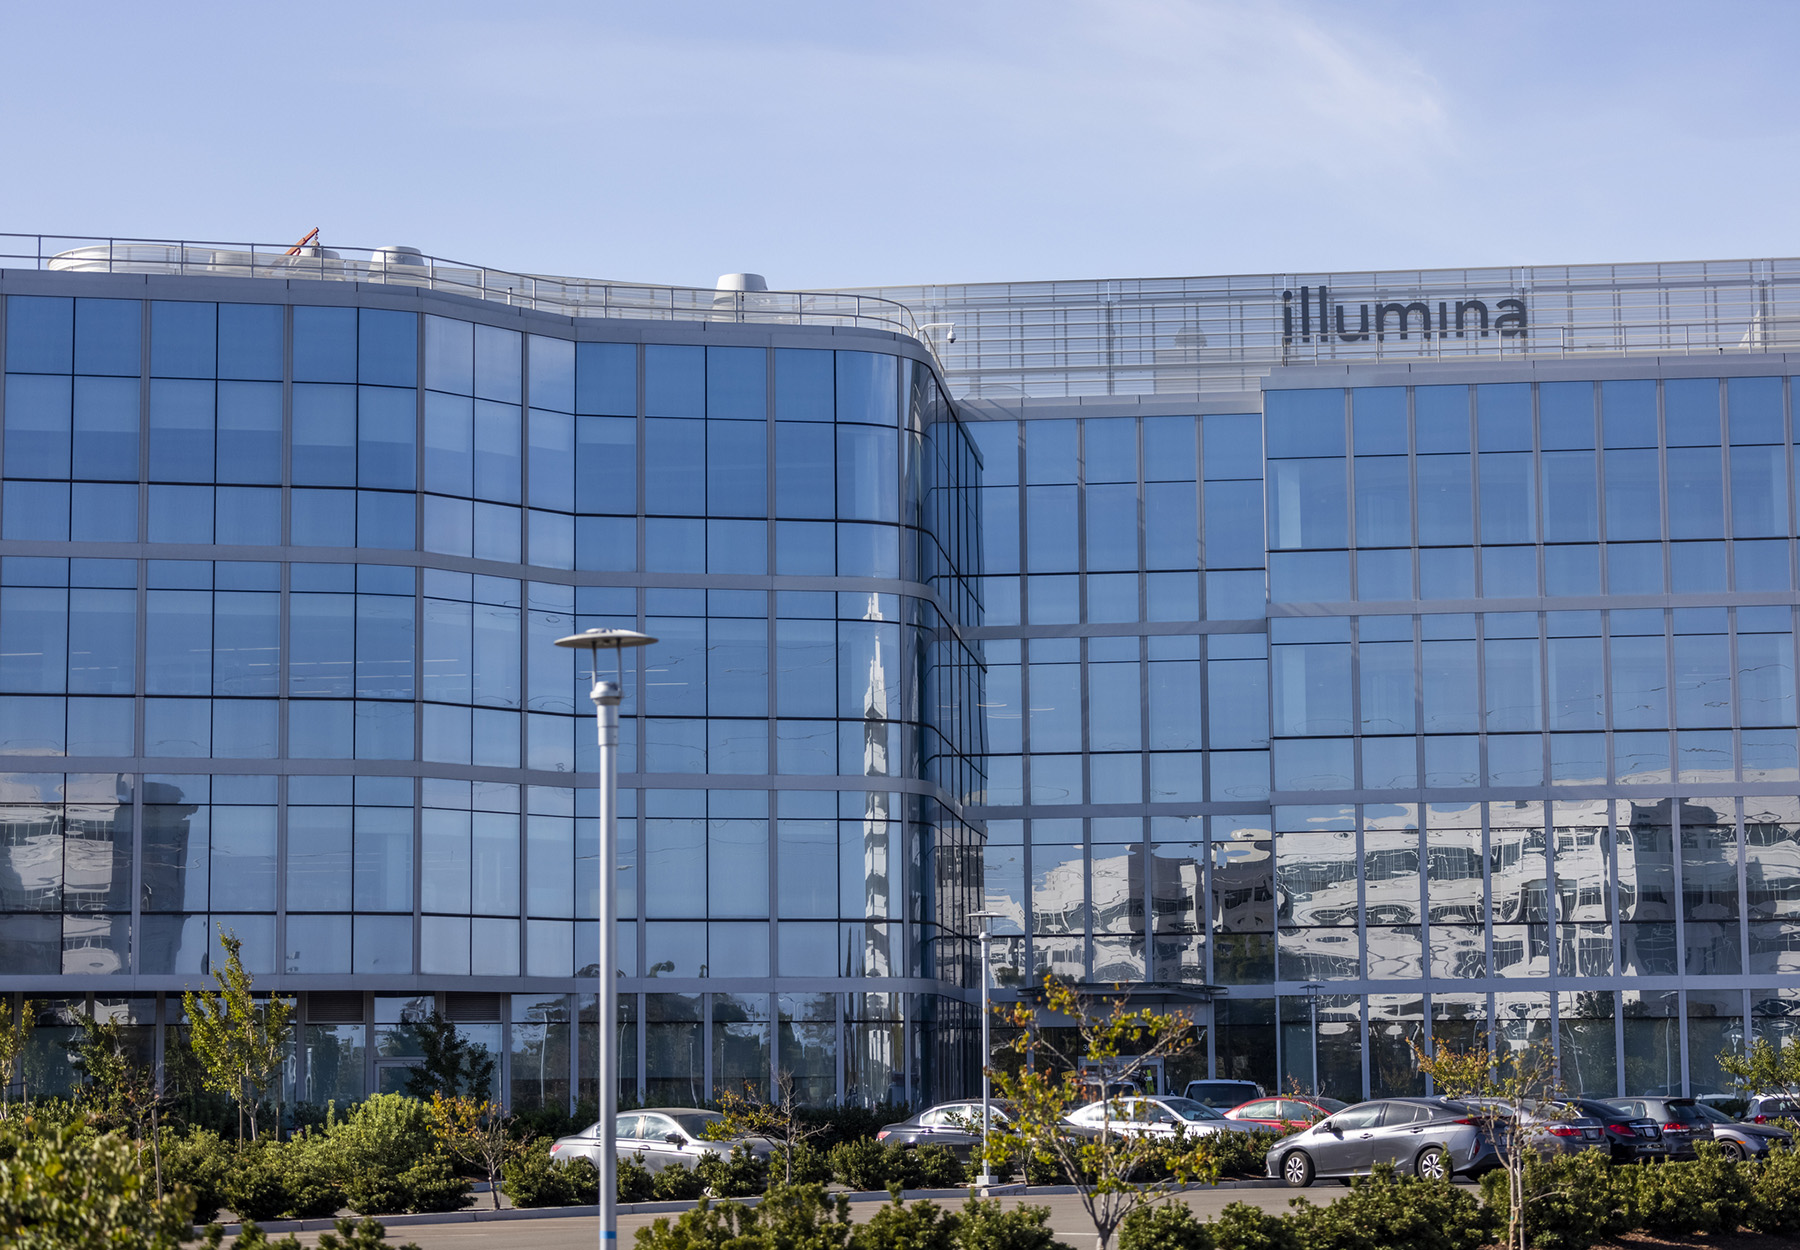 Biotech DNA sequencing giant illumina in their Foster City location